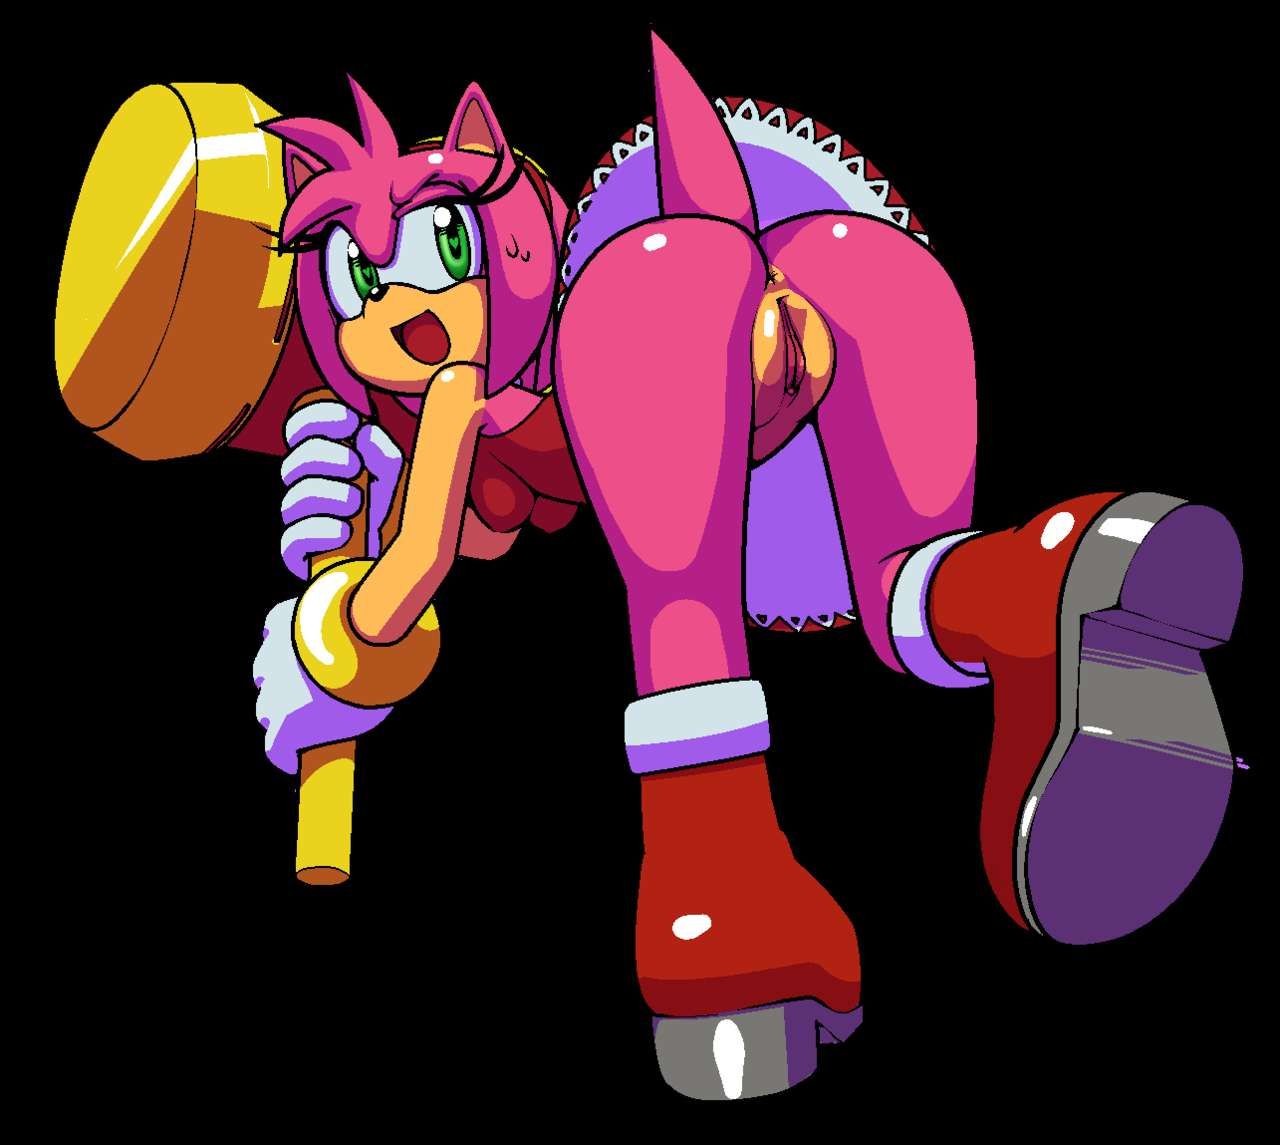 Amy Rose Collection - Hotred/isadultart 23